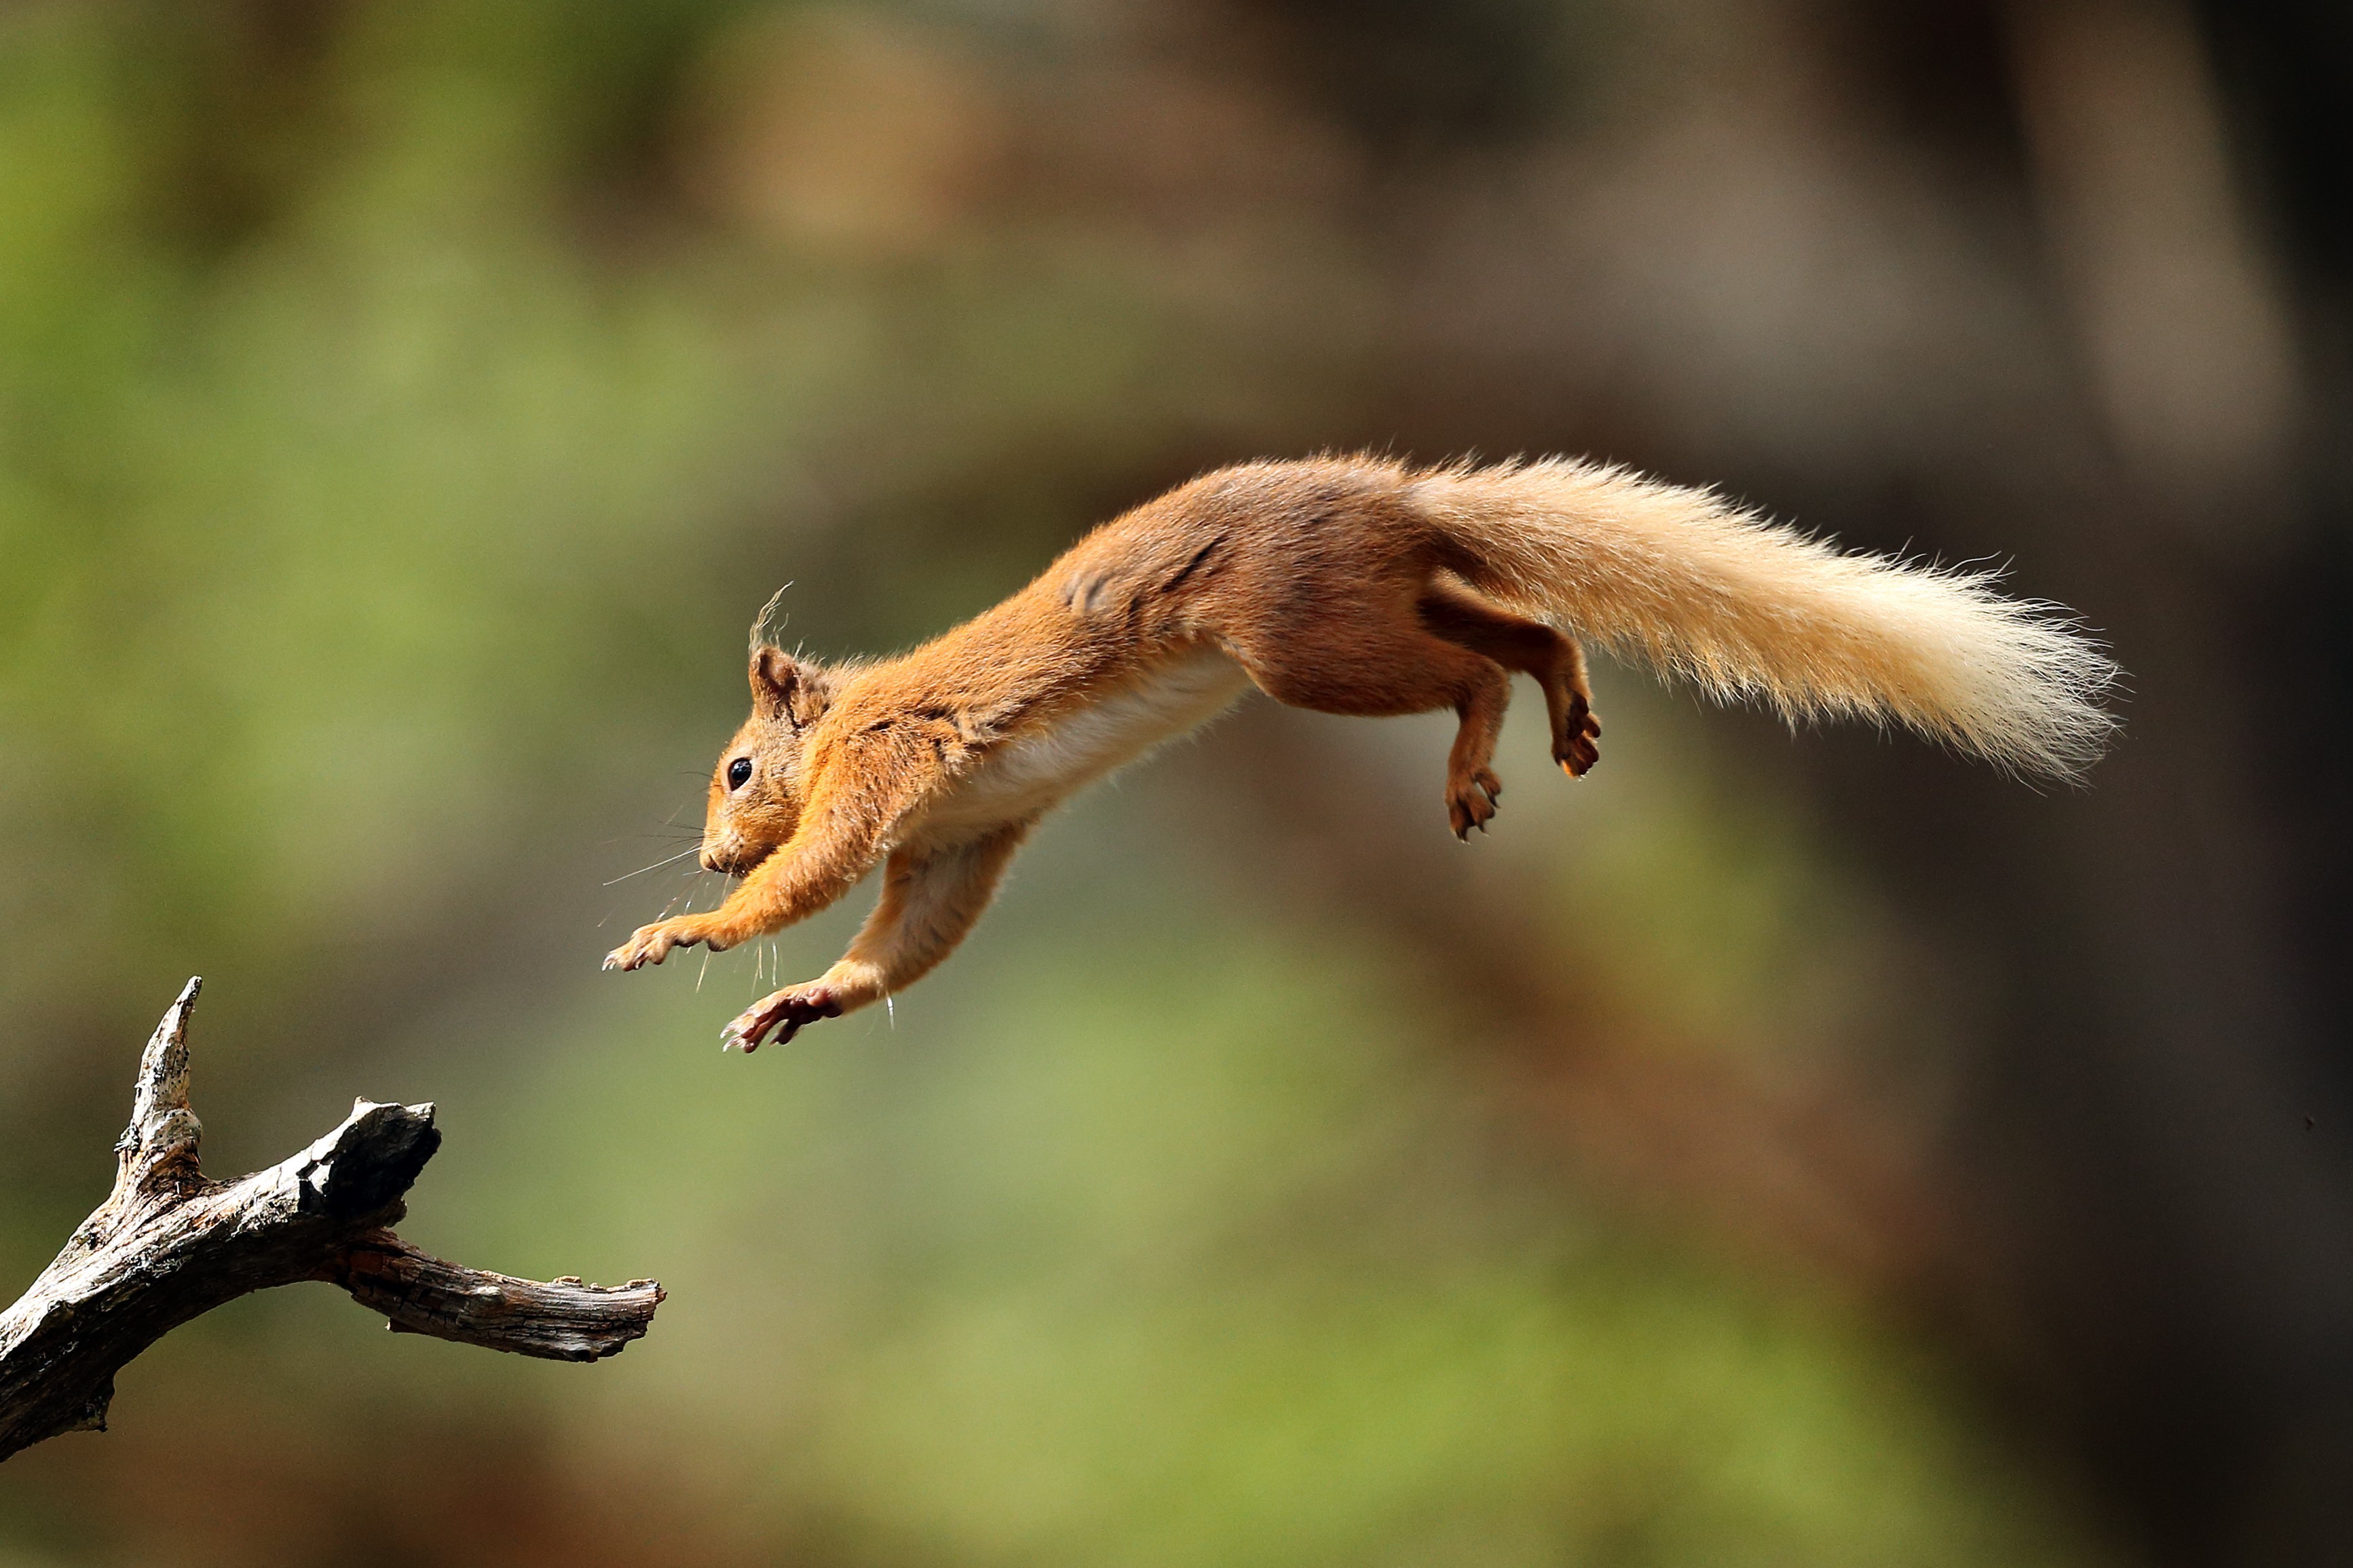 Leaping squirrels could help scientists develop more agile robots | Article  | The United States Army